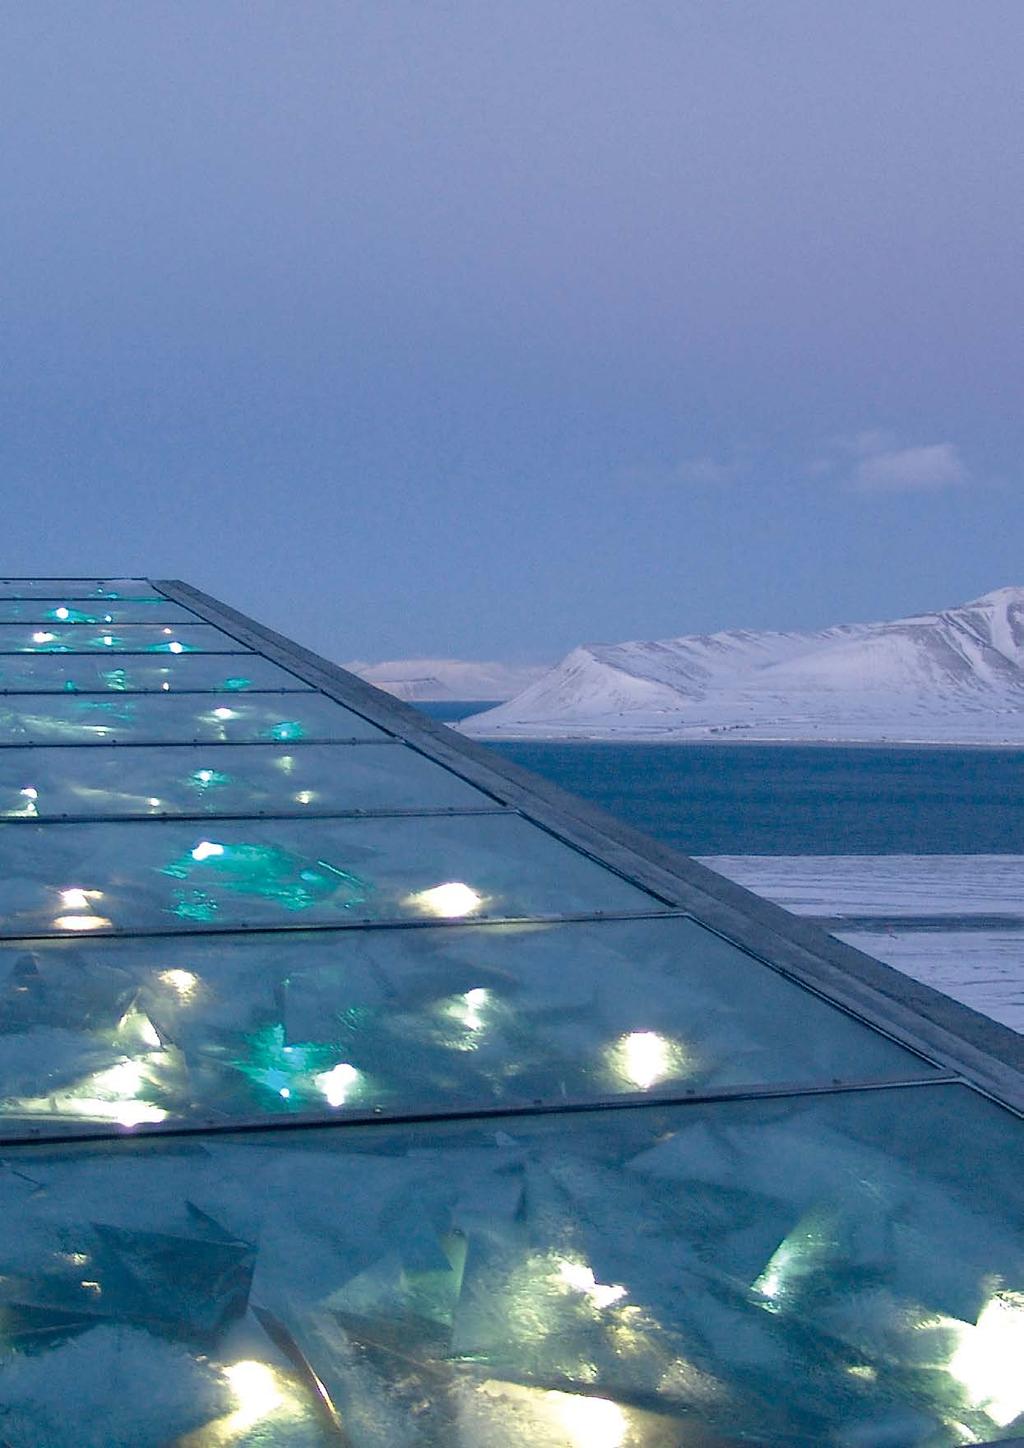 A seed bank on the Svalbard islands in Norway: Seeds from around the world are stored in a 93 m long and 100 m deep tunnel to act as